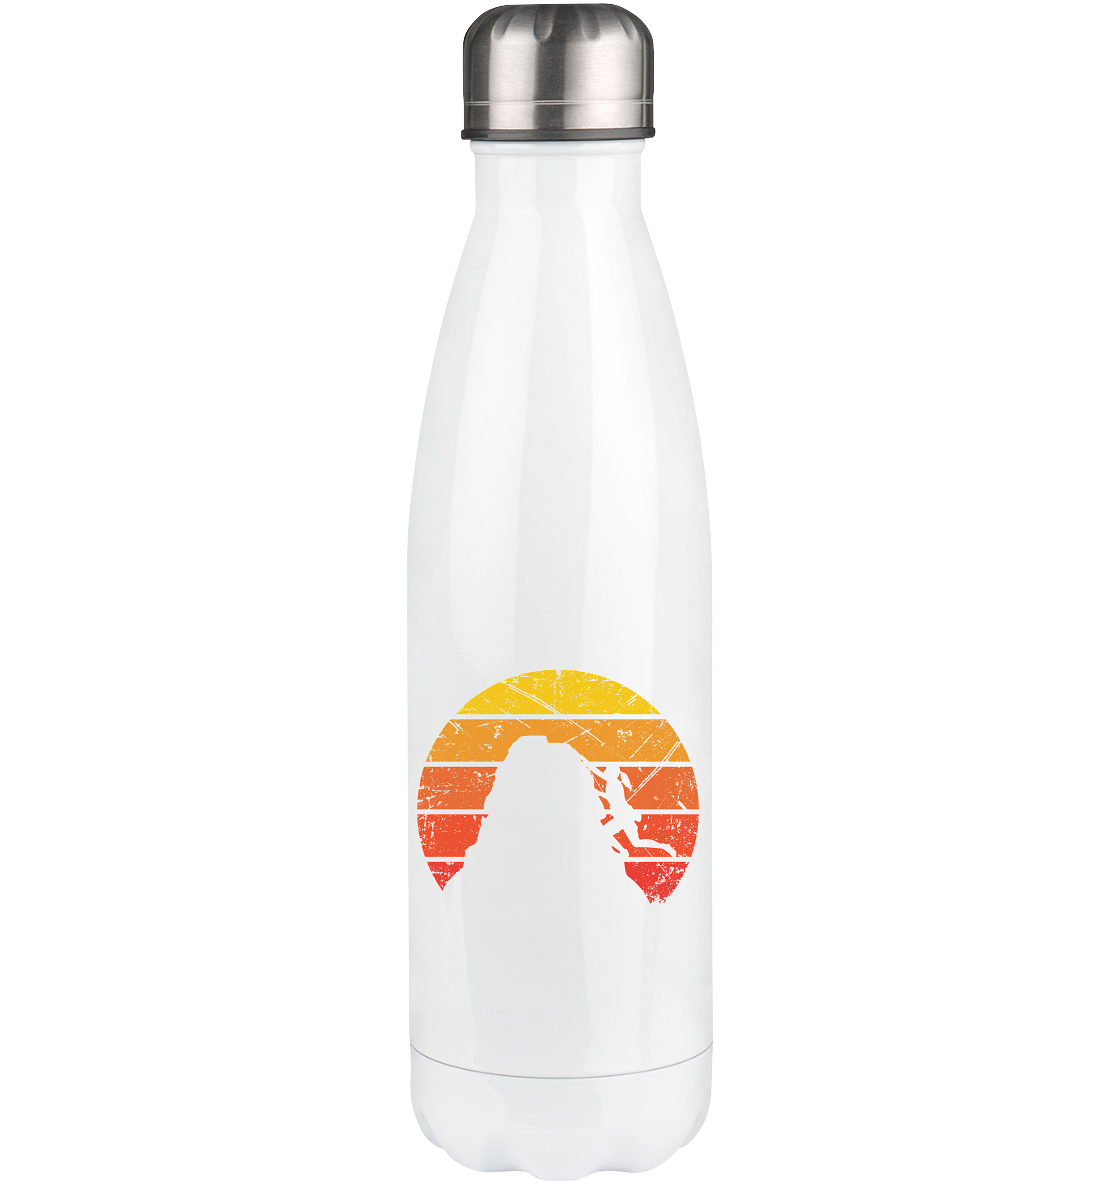 Vintage Sun and Climbing 1 - Edelstahl Thermosflasche klettern 500ml